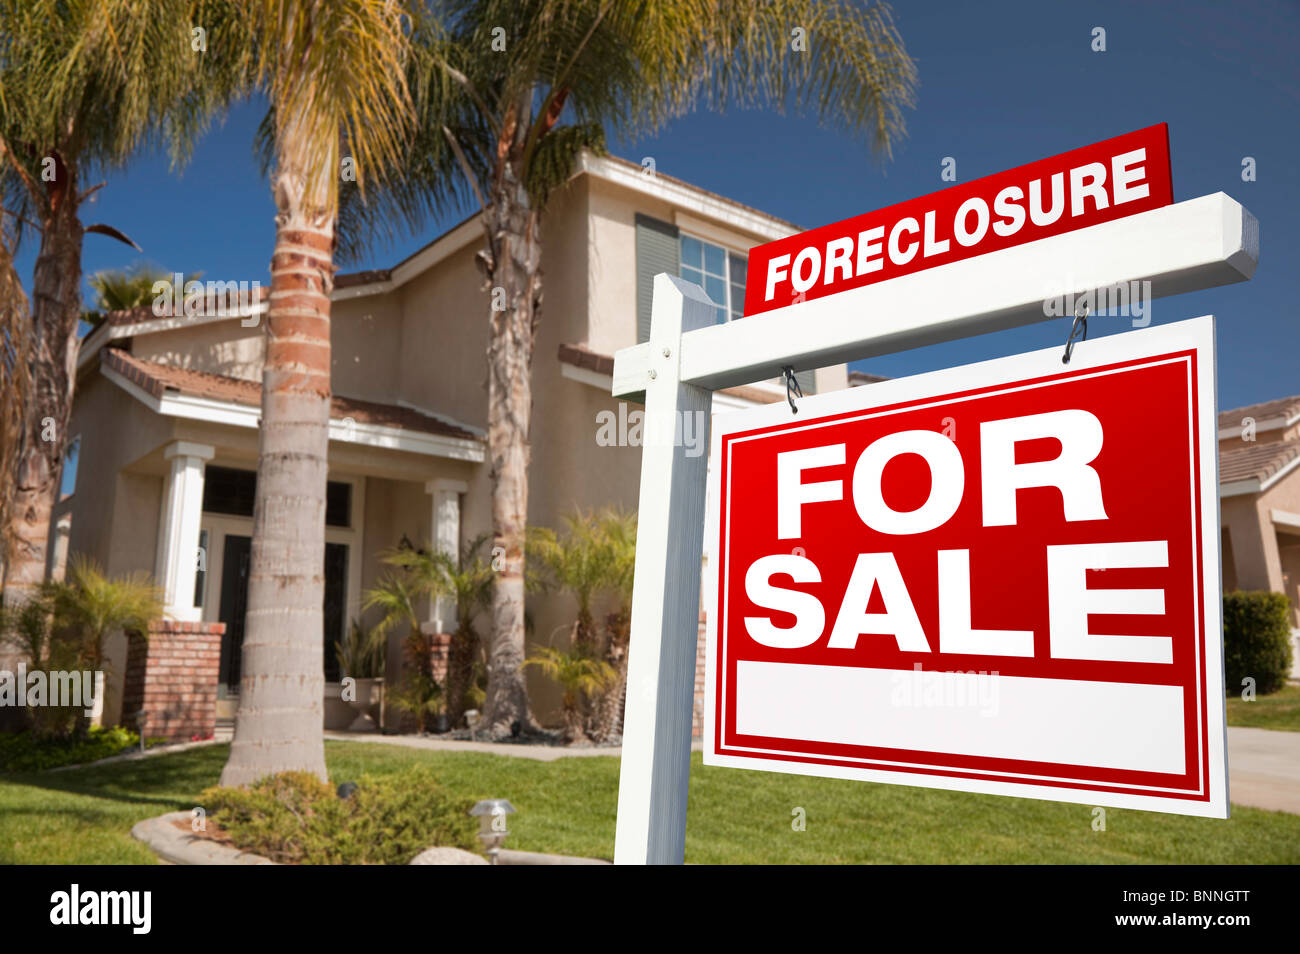 Foreclosure For Sale Real Estate Sign in Front of House. Stock Photo